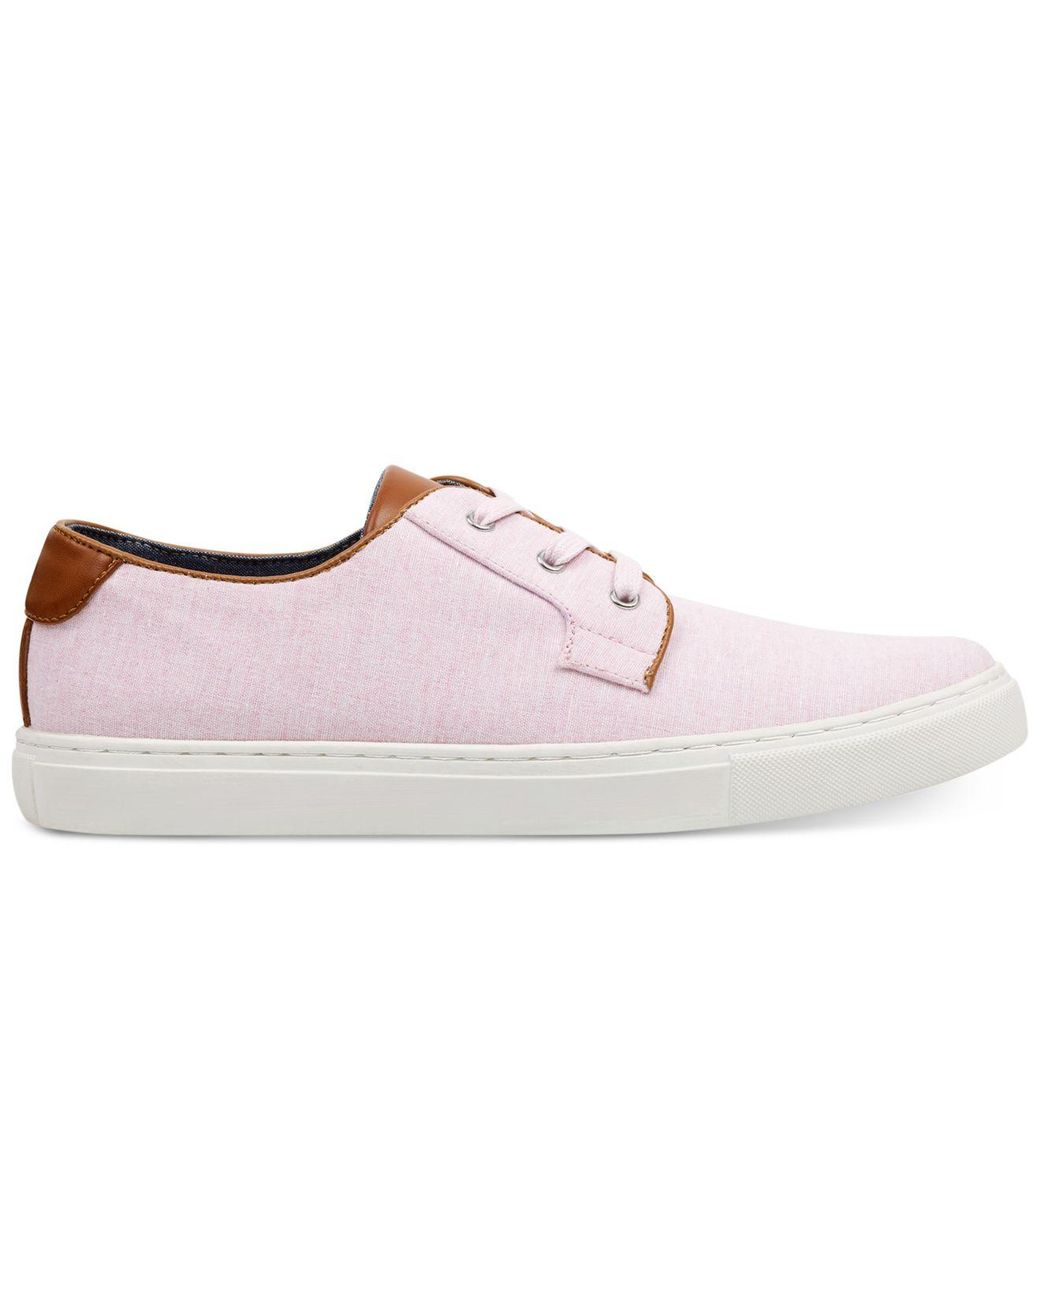 Tommy Hilfiger Mckenzie Shoes in Pink for Men - Save 39% - Lyst